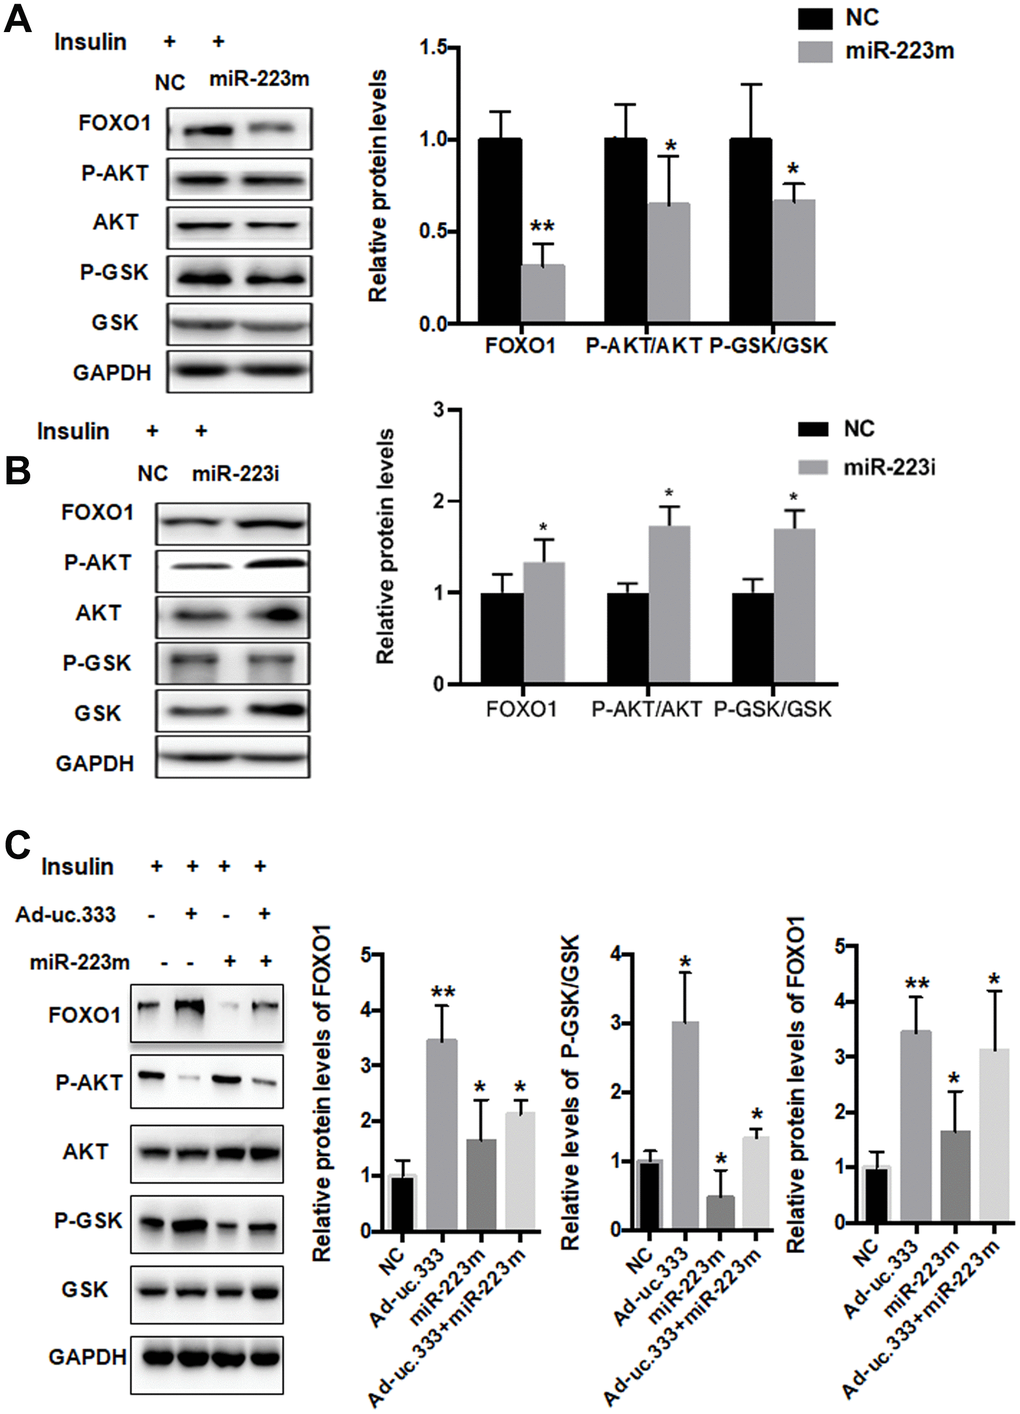 miR-223 regulated IR through direct targeting of FOXO1. (A) Protein levels of P-AKT, AKT, P-GSK, GSK, and GAPDH in HepG2 cells transfected with mimic miR-223 or NC for 48 h, as analyzed using Western blot. (B) Protein levels of P-AKT, AKT, P-GSK, GSK, and GAPDH in HepG2 cells transfected with miR-223 inhibitor or NC for 48 h, as analyzed using Western blot. (C) Protein levels of P-AKT, AKT, P-GSK, GSK, and GAPDH in HepG2 cells transfected with mimic miR-223 or NC for 48 h, as analyzed using Western blot. Data are mean ± SEM; *P P 